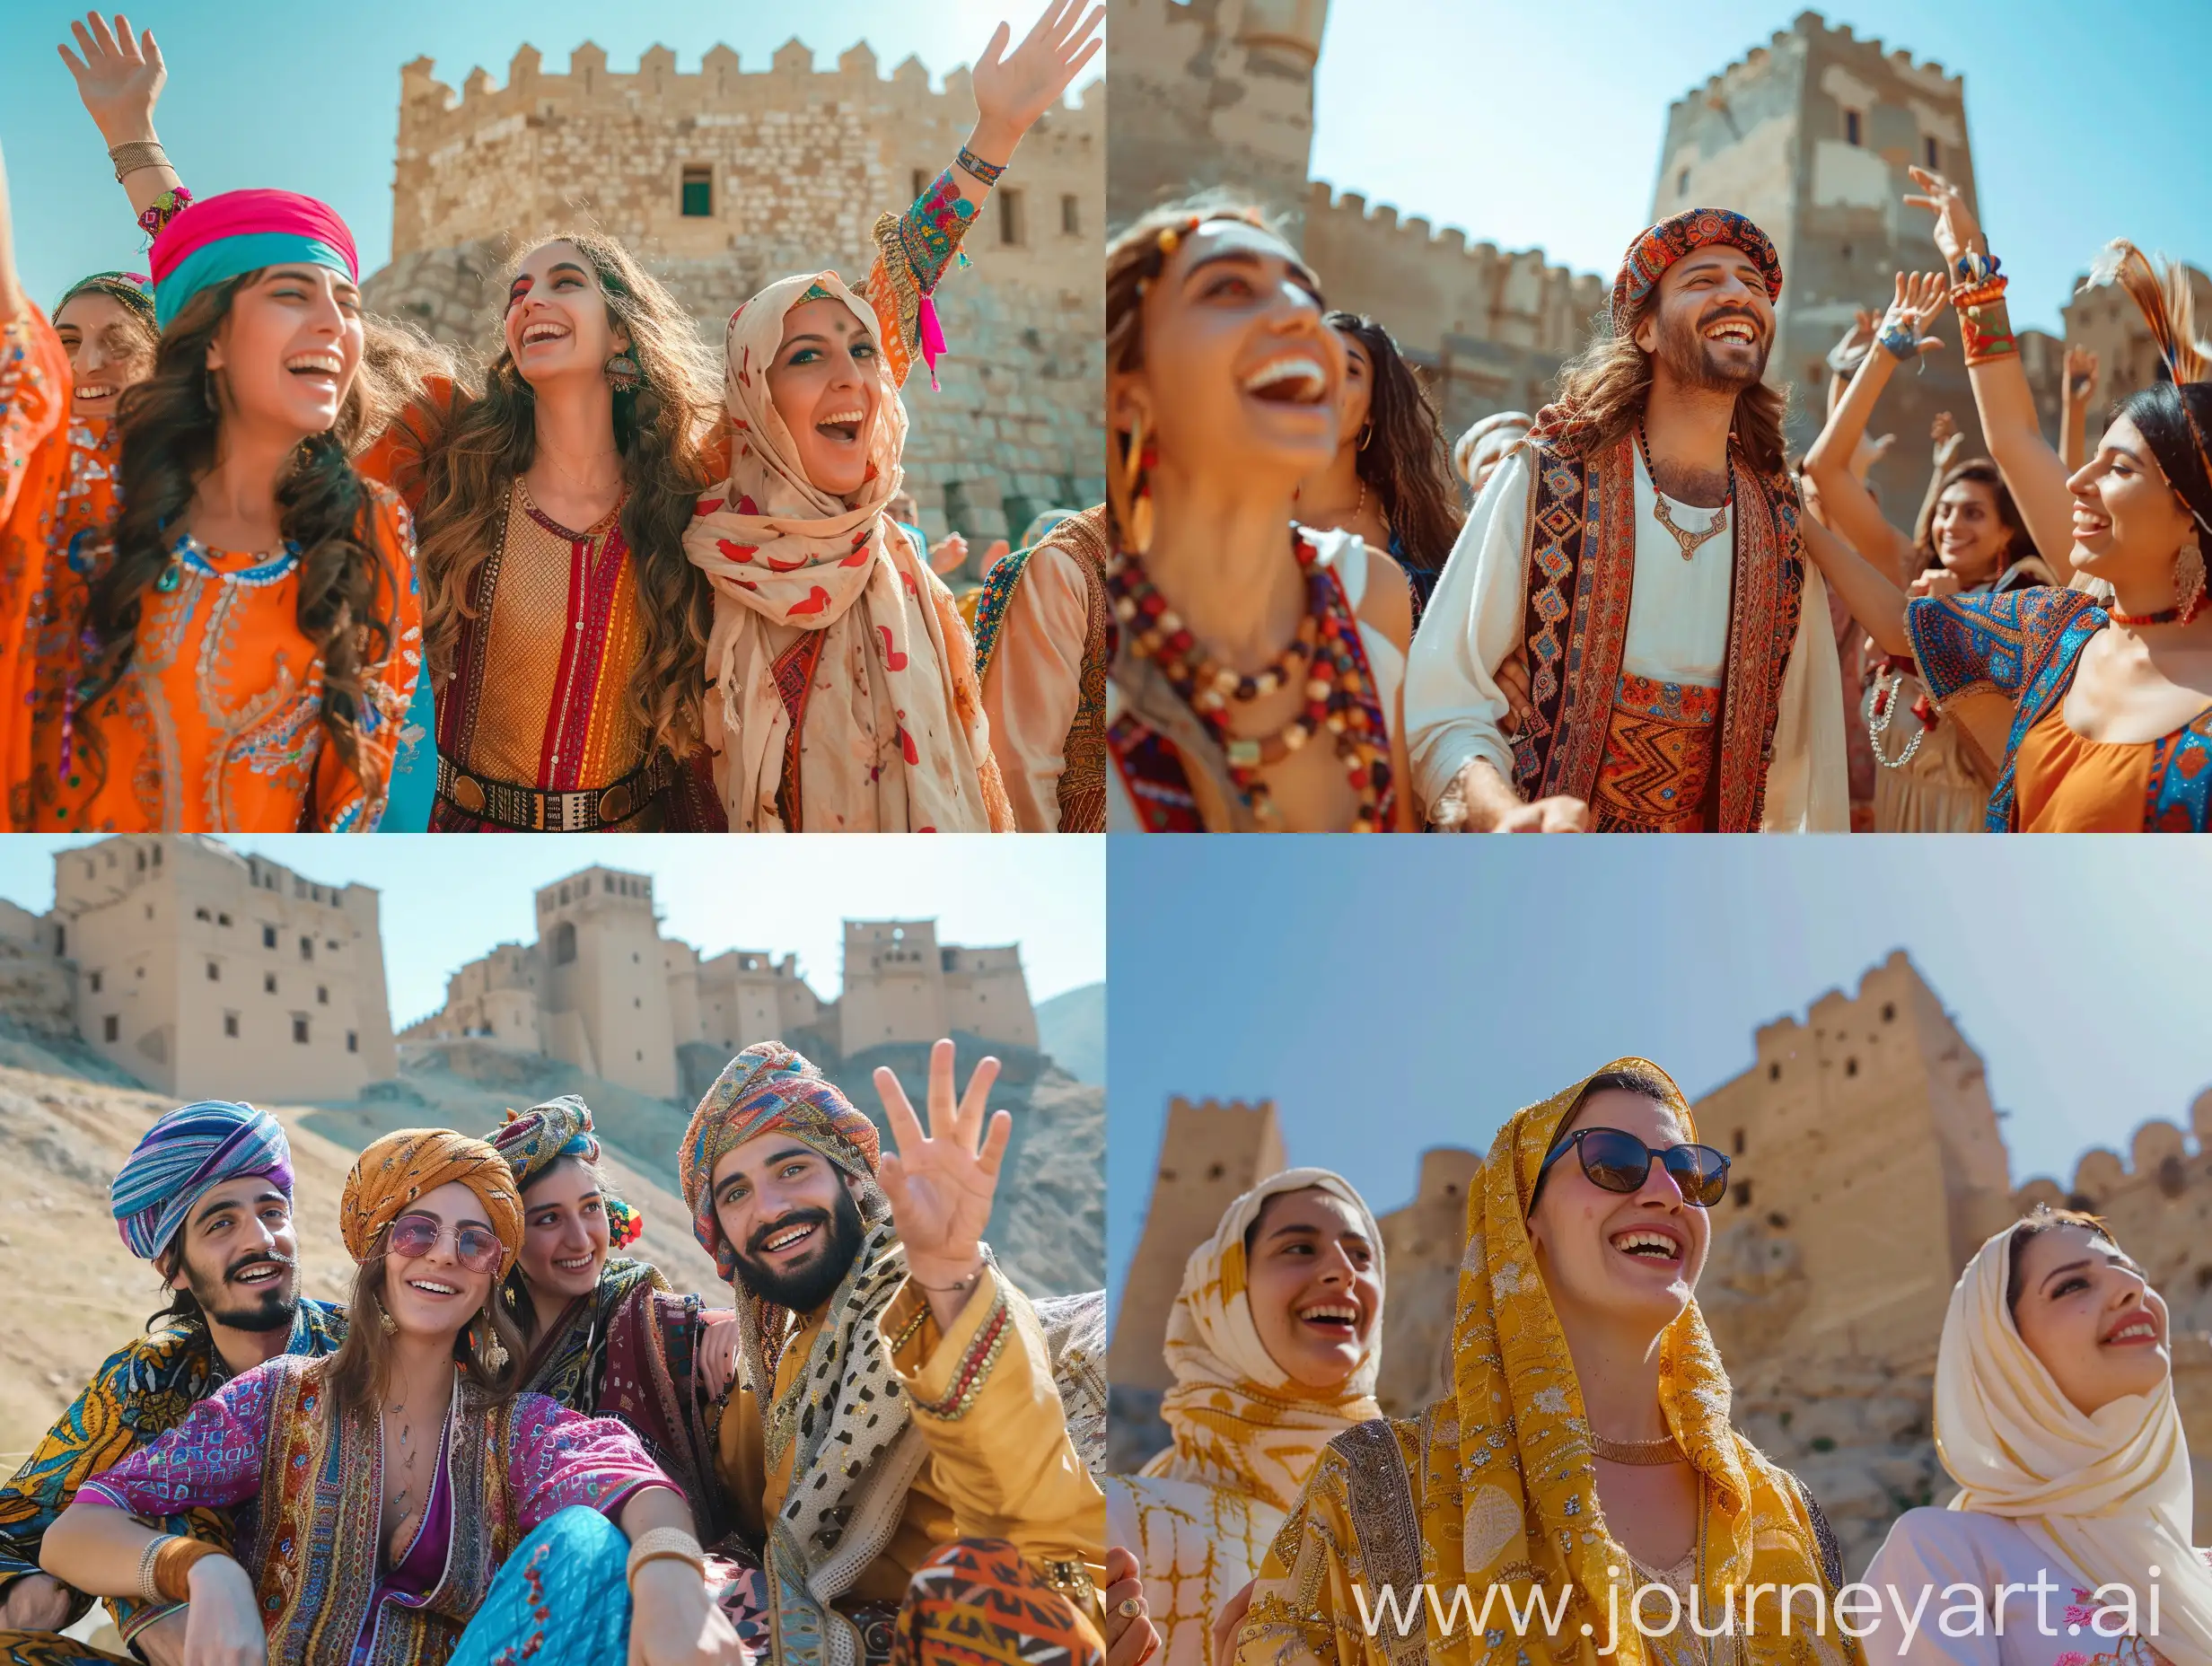 Persian people in traditional Persian dress are happy next to an old fort in the Persian Empire The people of a traditional village in ancient Iran next to a castle are all calling out to someone or cheering together, they are in the Persian Empire.
a real picture with fine details and high quality, with noon lighting for me, create a realistic 4K photo with fine details and daylight lighting.  create for me a real quality photo with fine details and midday sun lighting, cinematic, epic realism,8K, highly detailed, medium shot, glamour lighting, natural lighting, backlit 